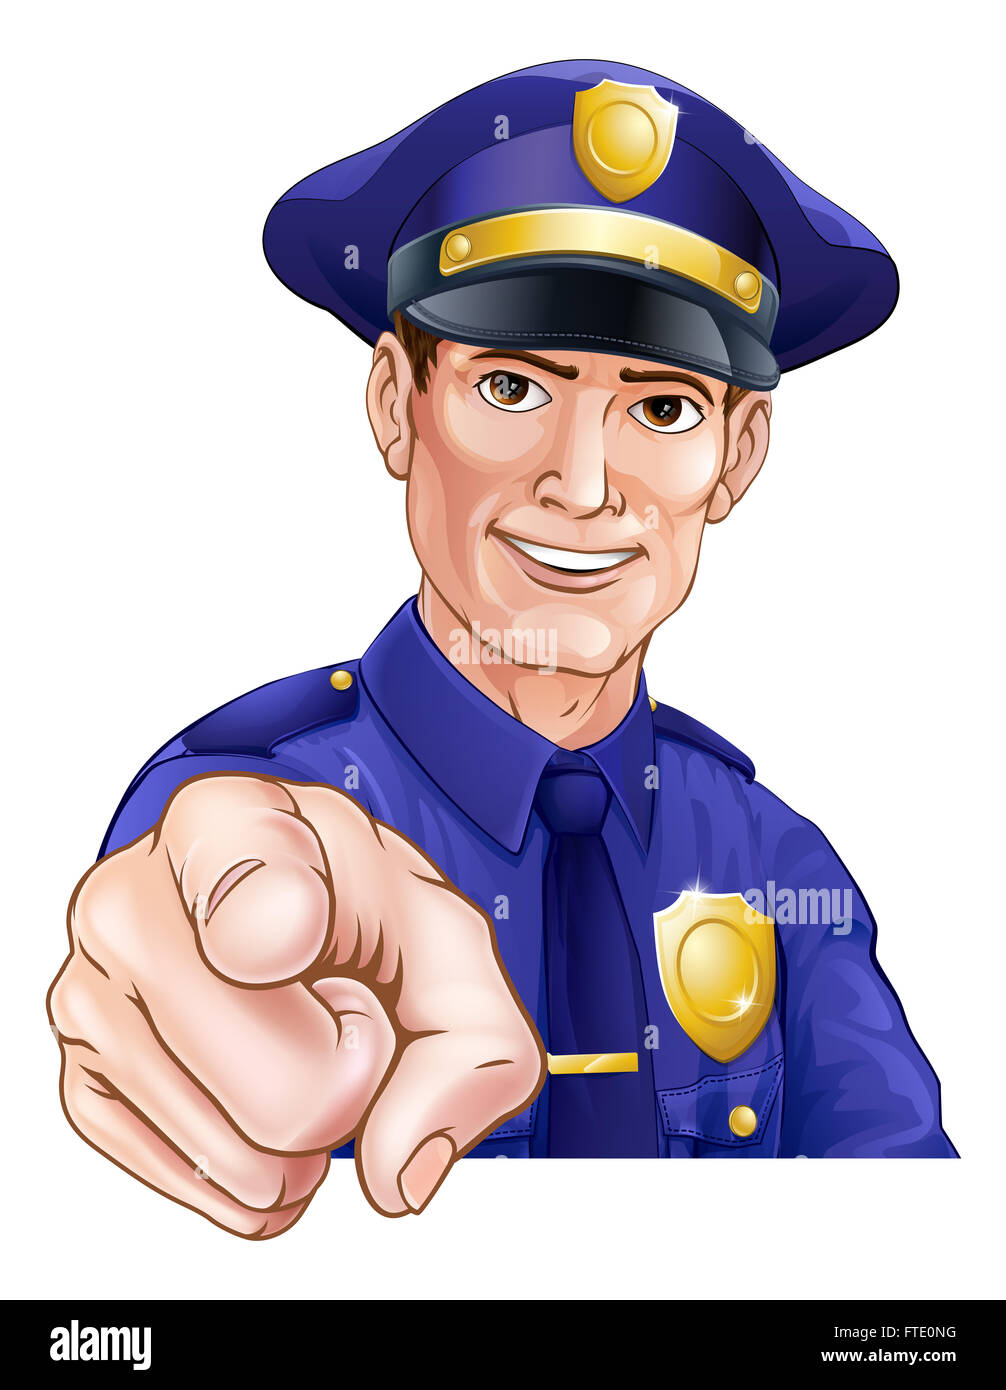 Happy friendly cartoon police officer policeman pointing Stock Photo - Alamy